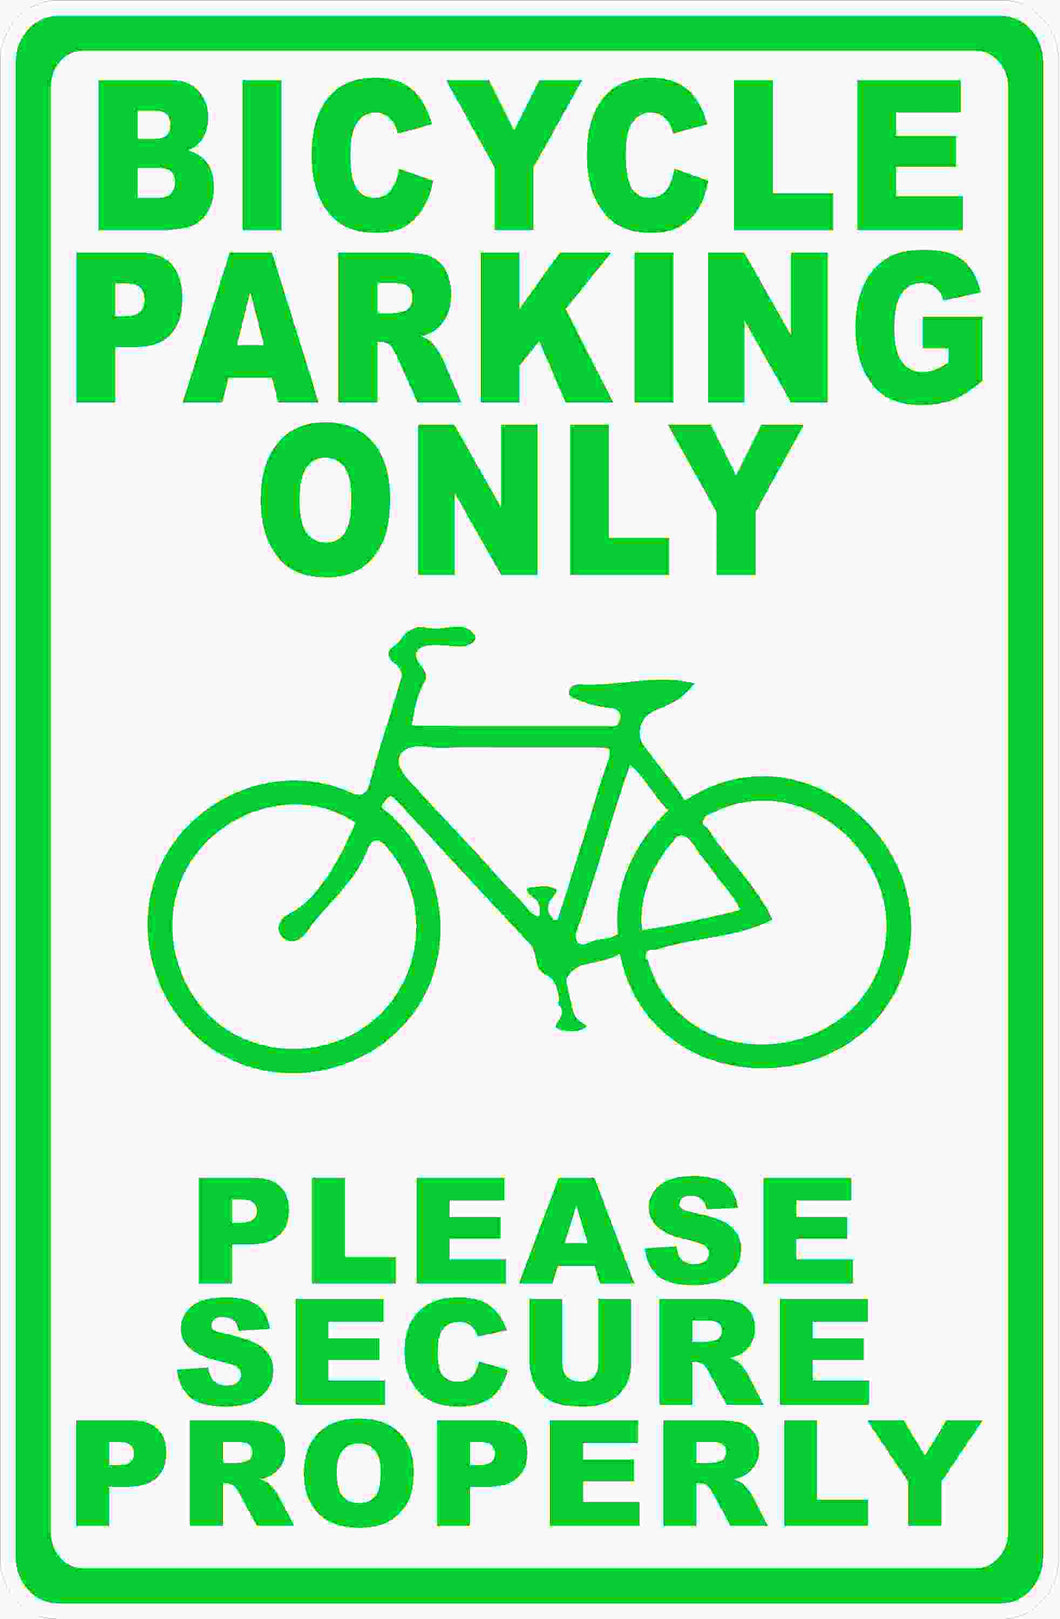 Bike Parking Only Sign by Sala Graphics